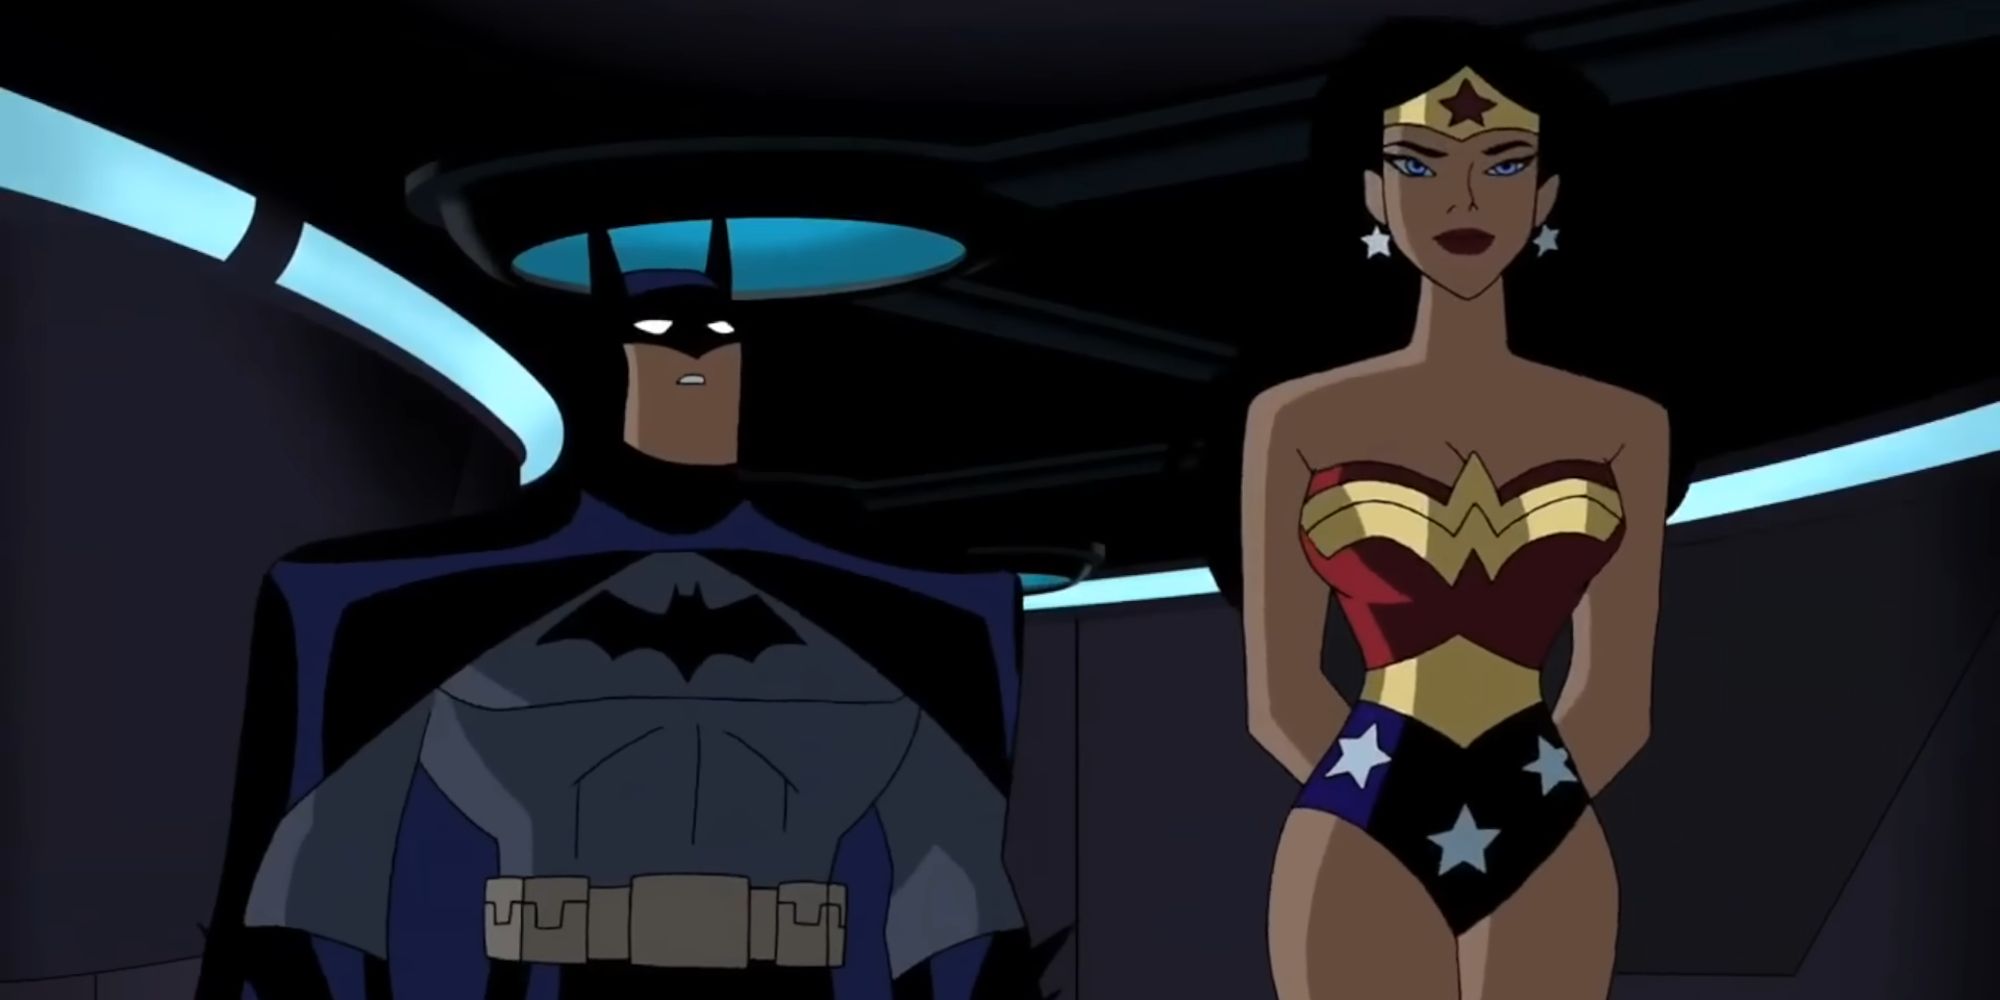 Batman and Wonder Woman roaming the halls of the Watchtower in Justice League Unlimited